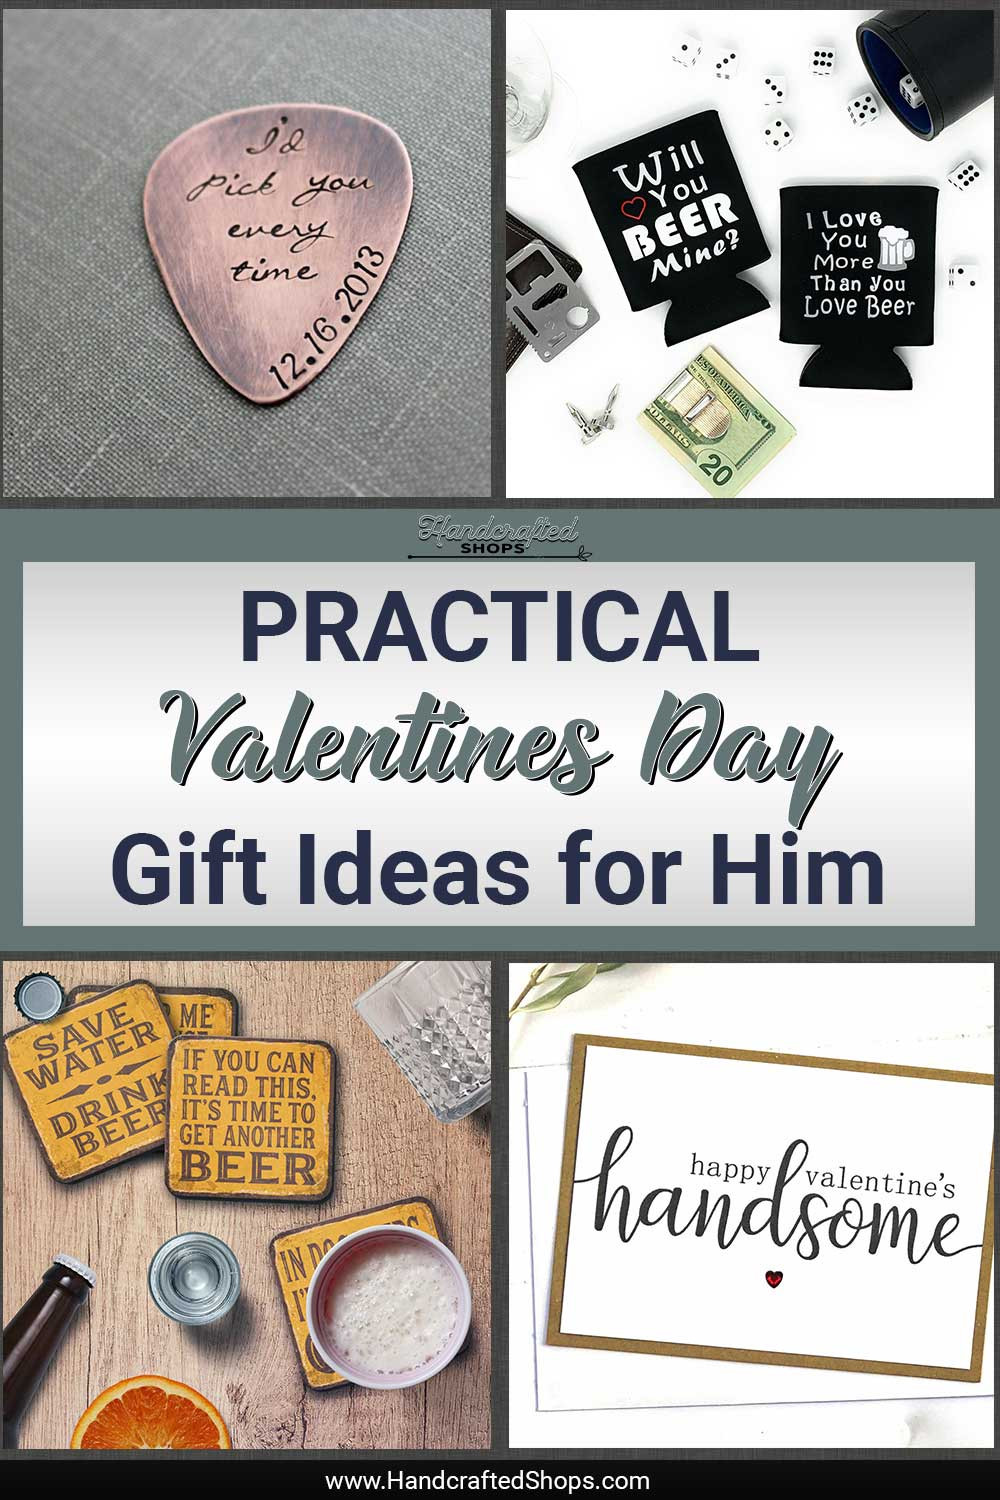 Valentines Day 2020 Gift Ideas
 Practical Valentines Day 2020 Gift Ideas for Him that are